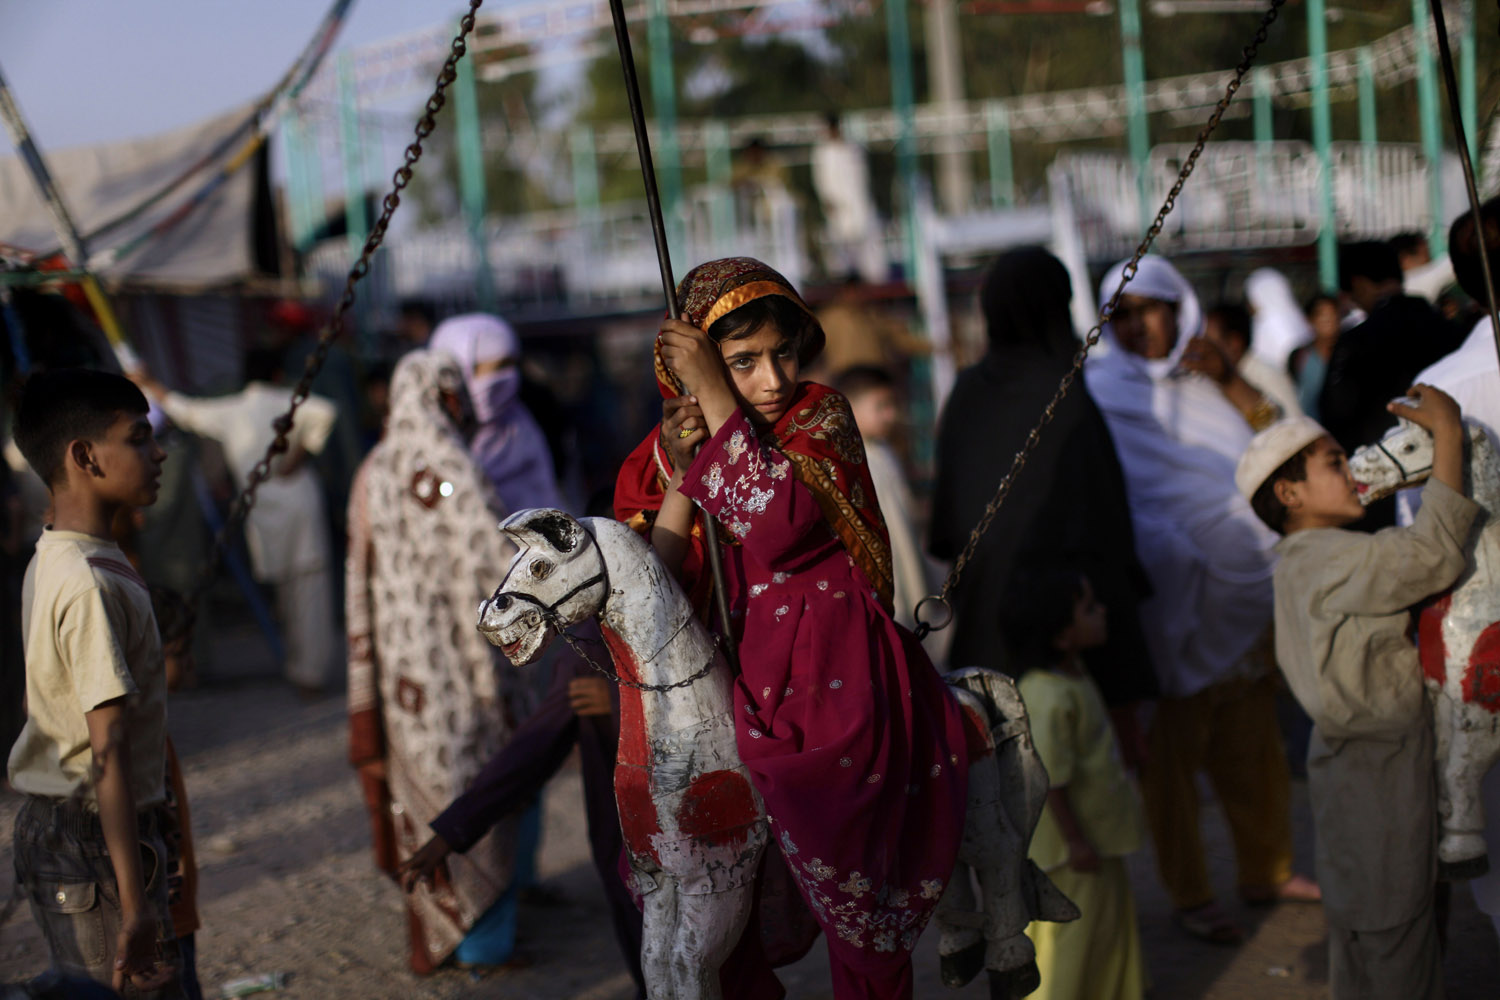 A Pakistani girl sits on a merry-go-round, hoping to have a free ride, at an entertainment park in Rawalpindi, Pakistan